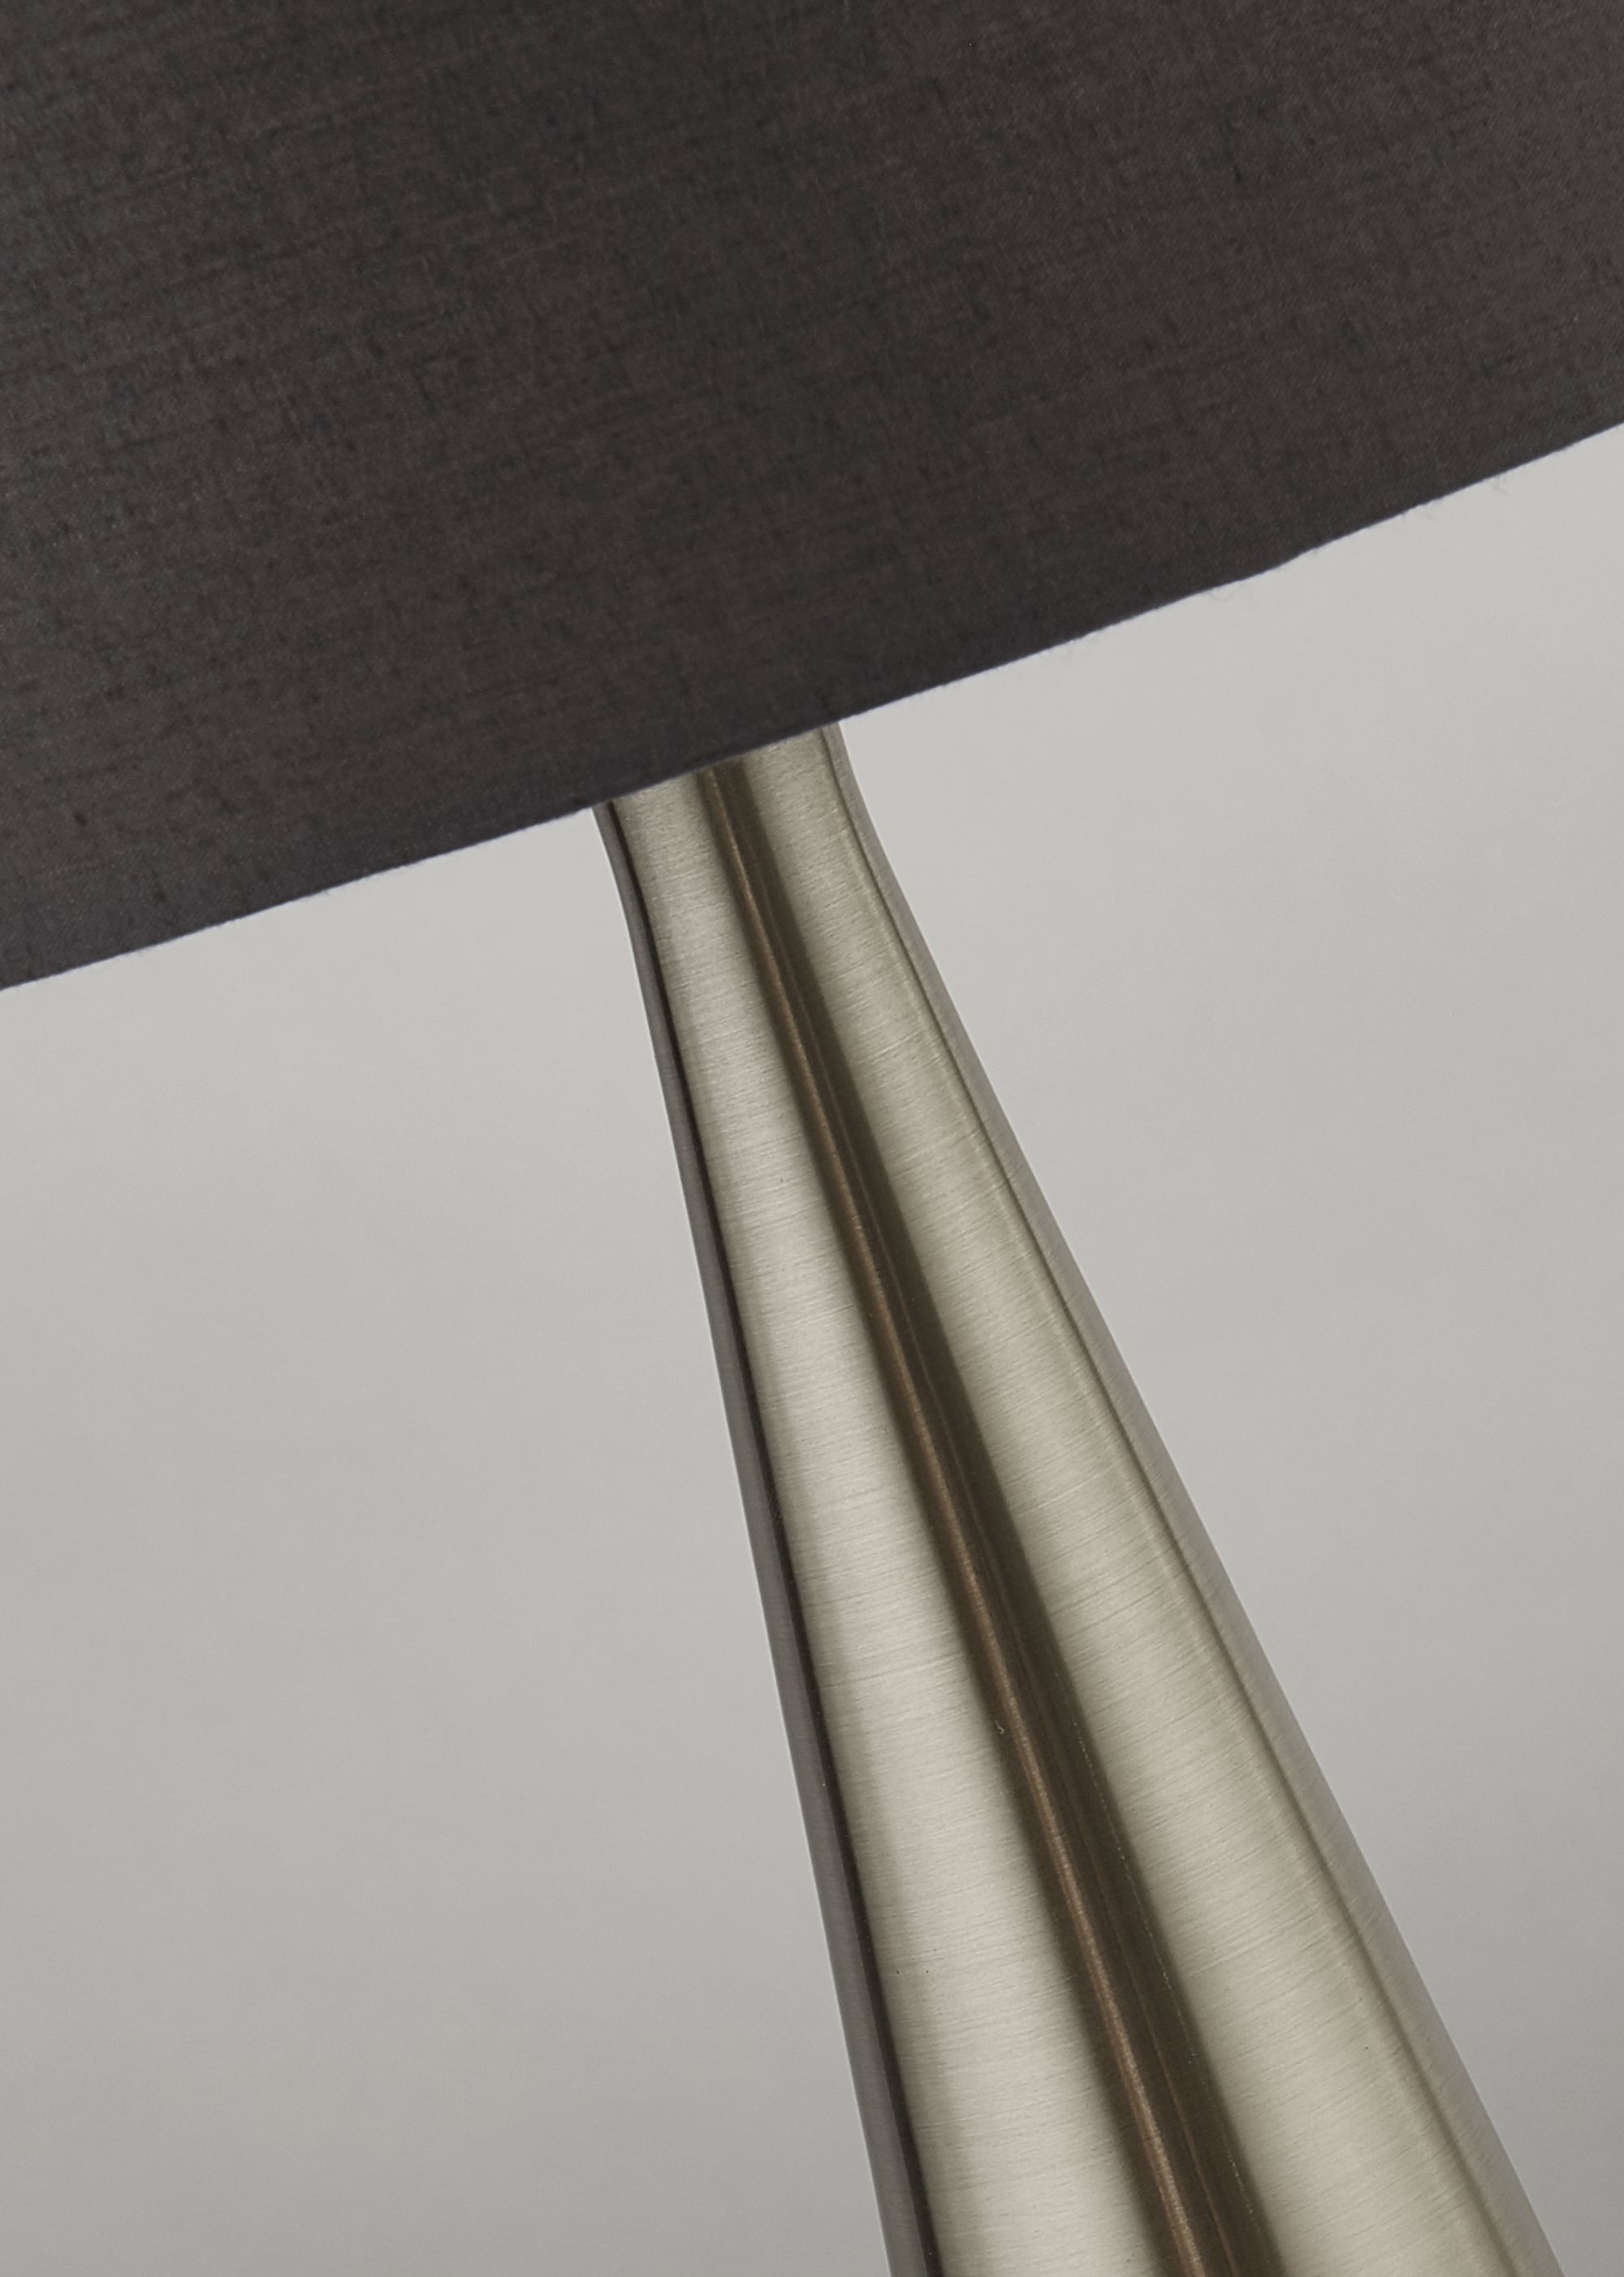 Lux & Belle Table Lamp - Satin Nickel & Grey Fabric Shade